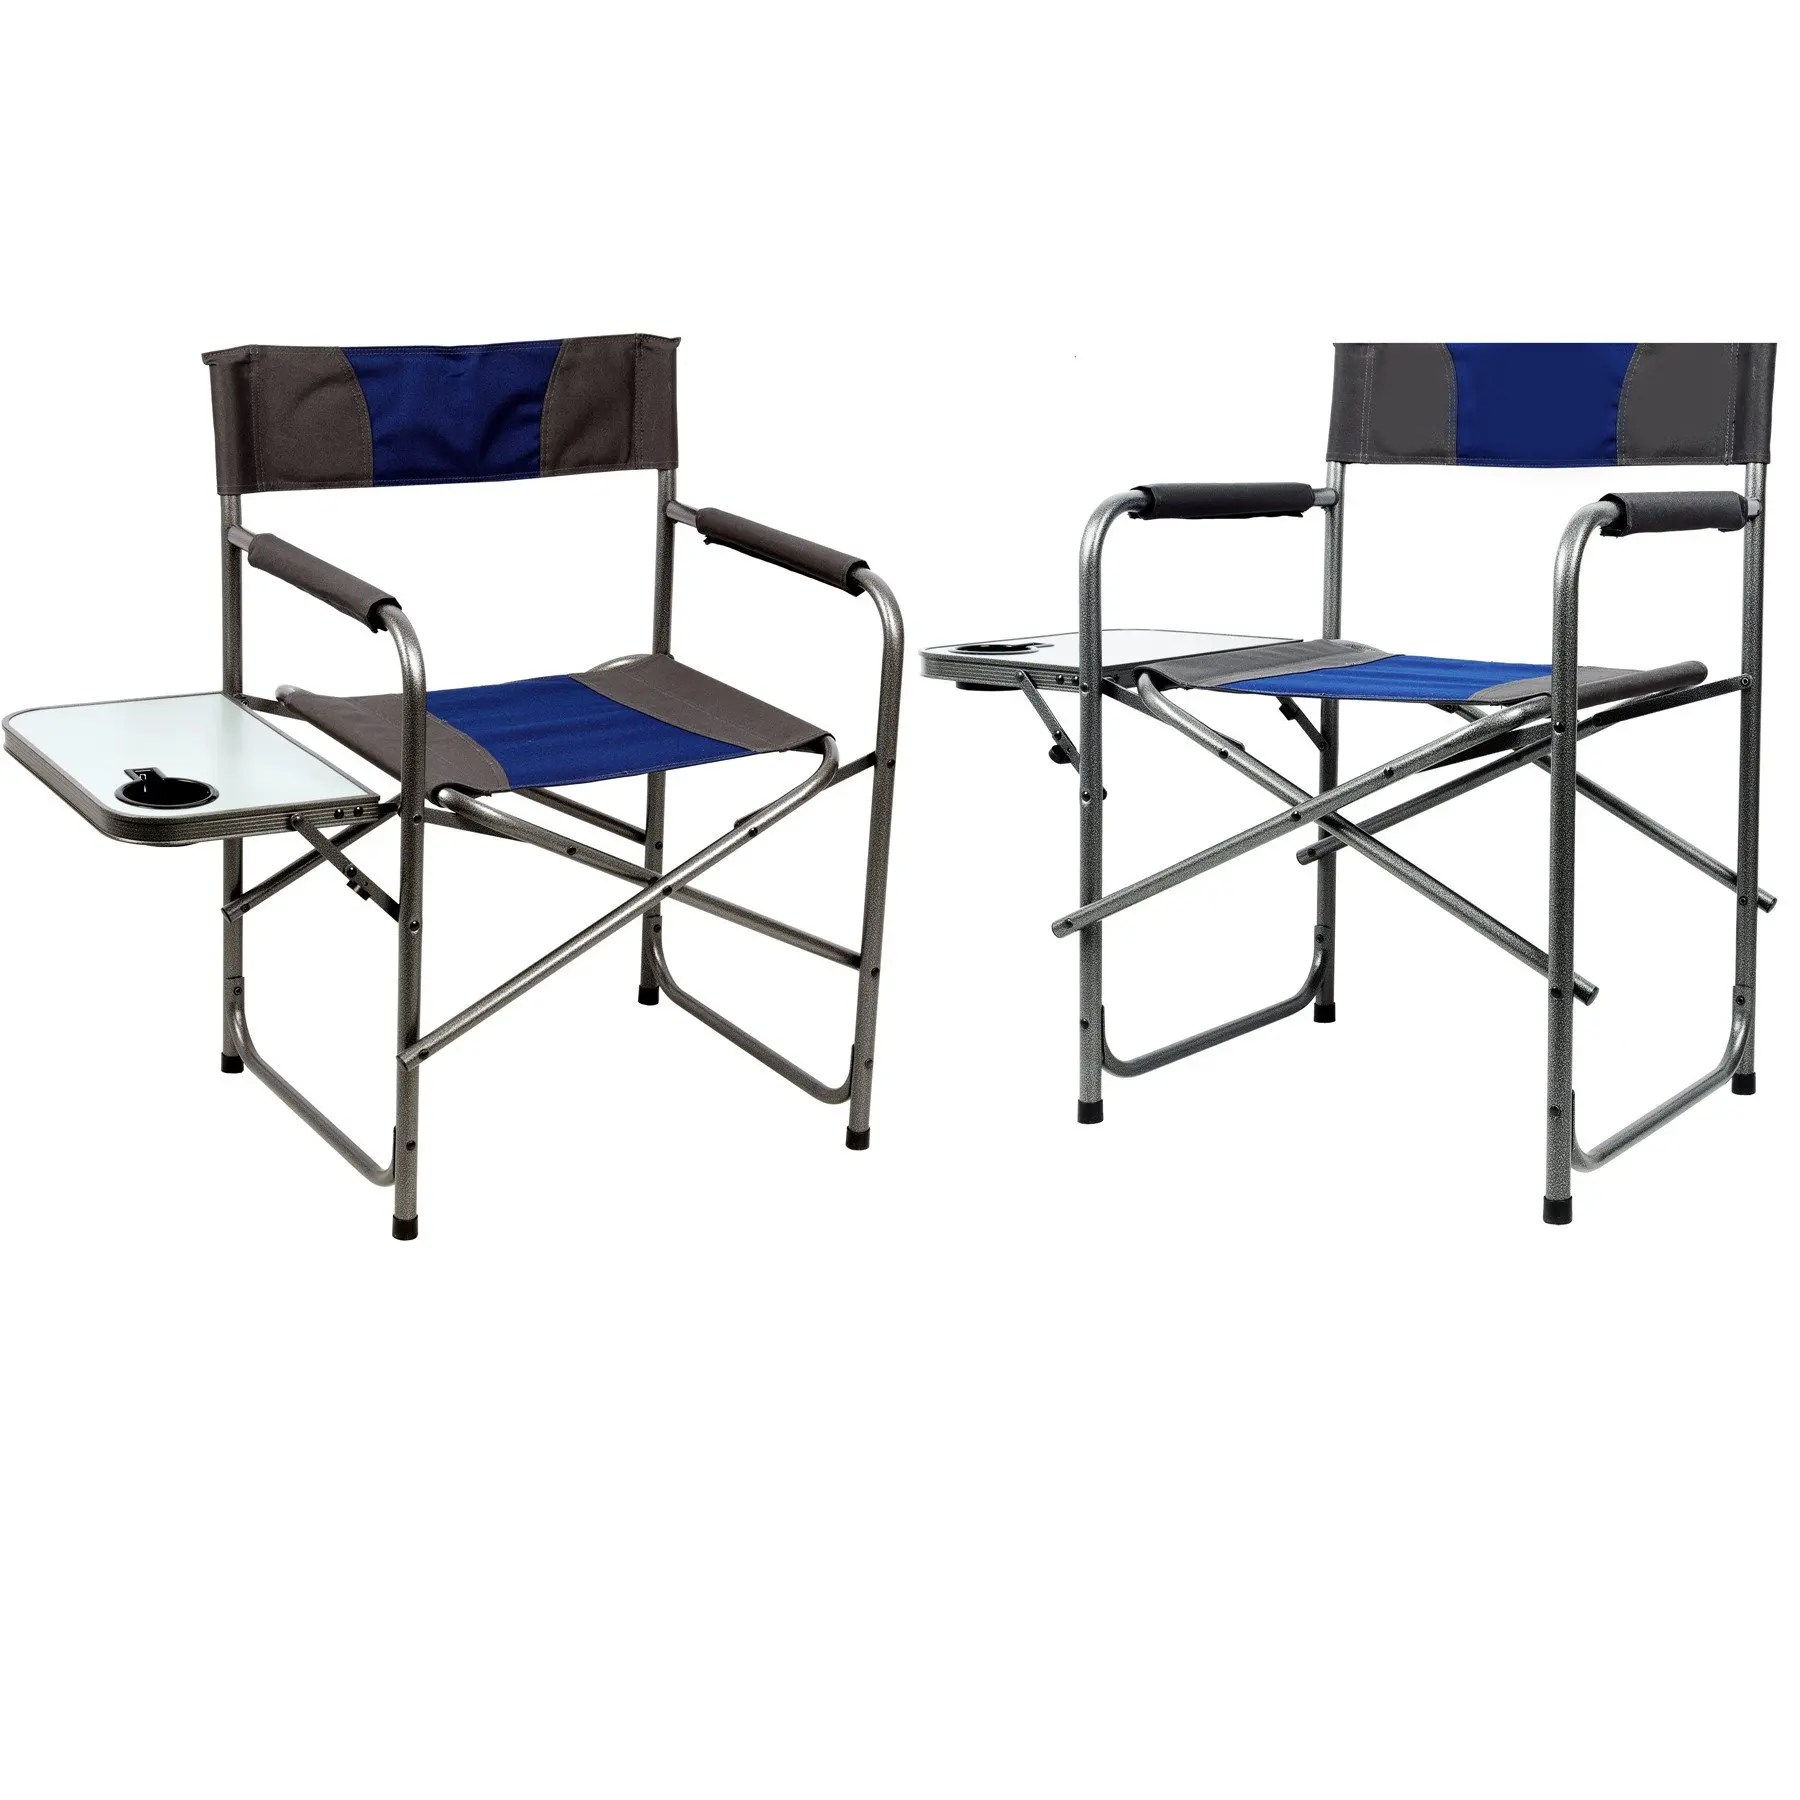 Cheap Directors Camping Chair Find Directors Camping Chair Deals